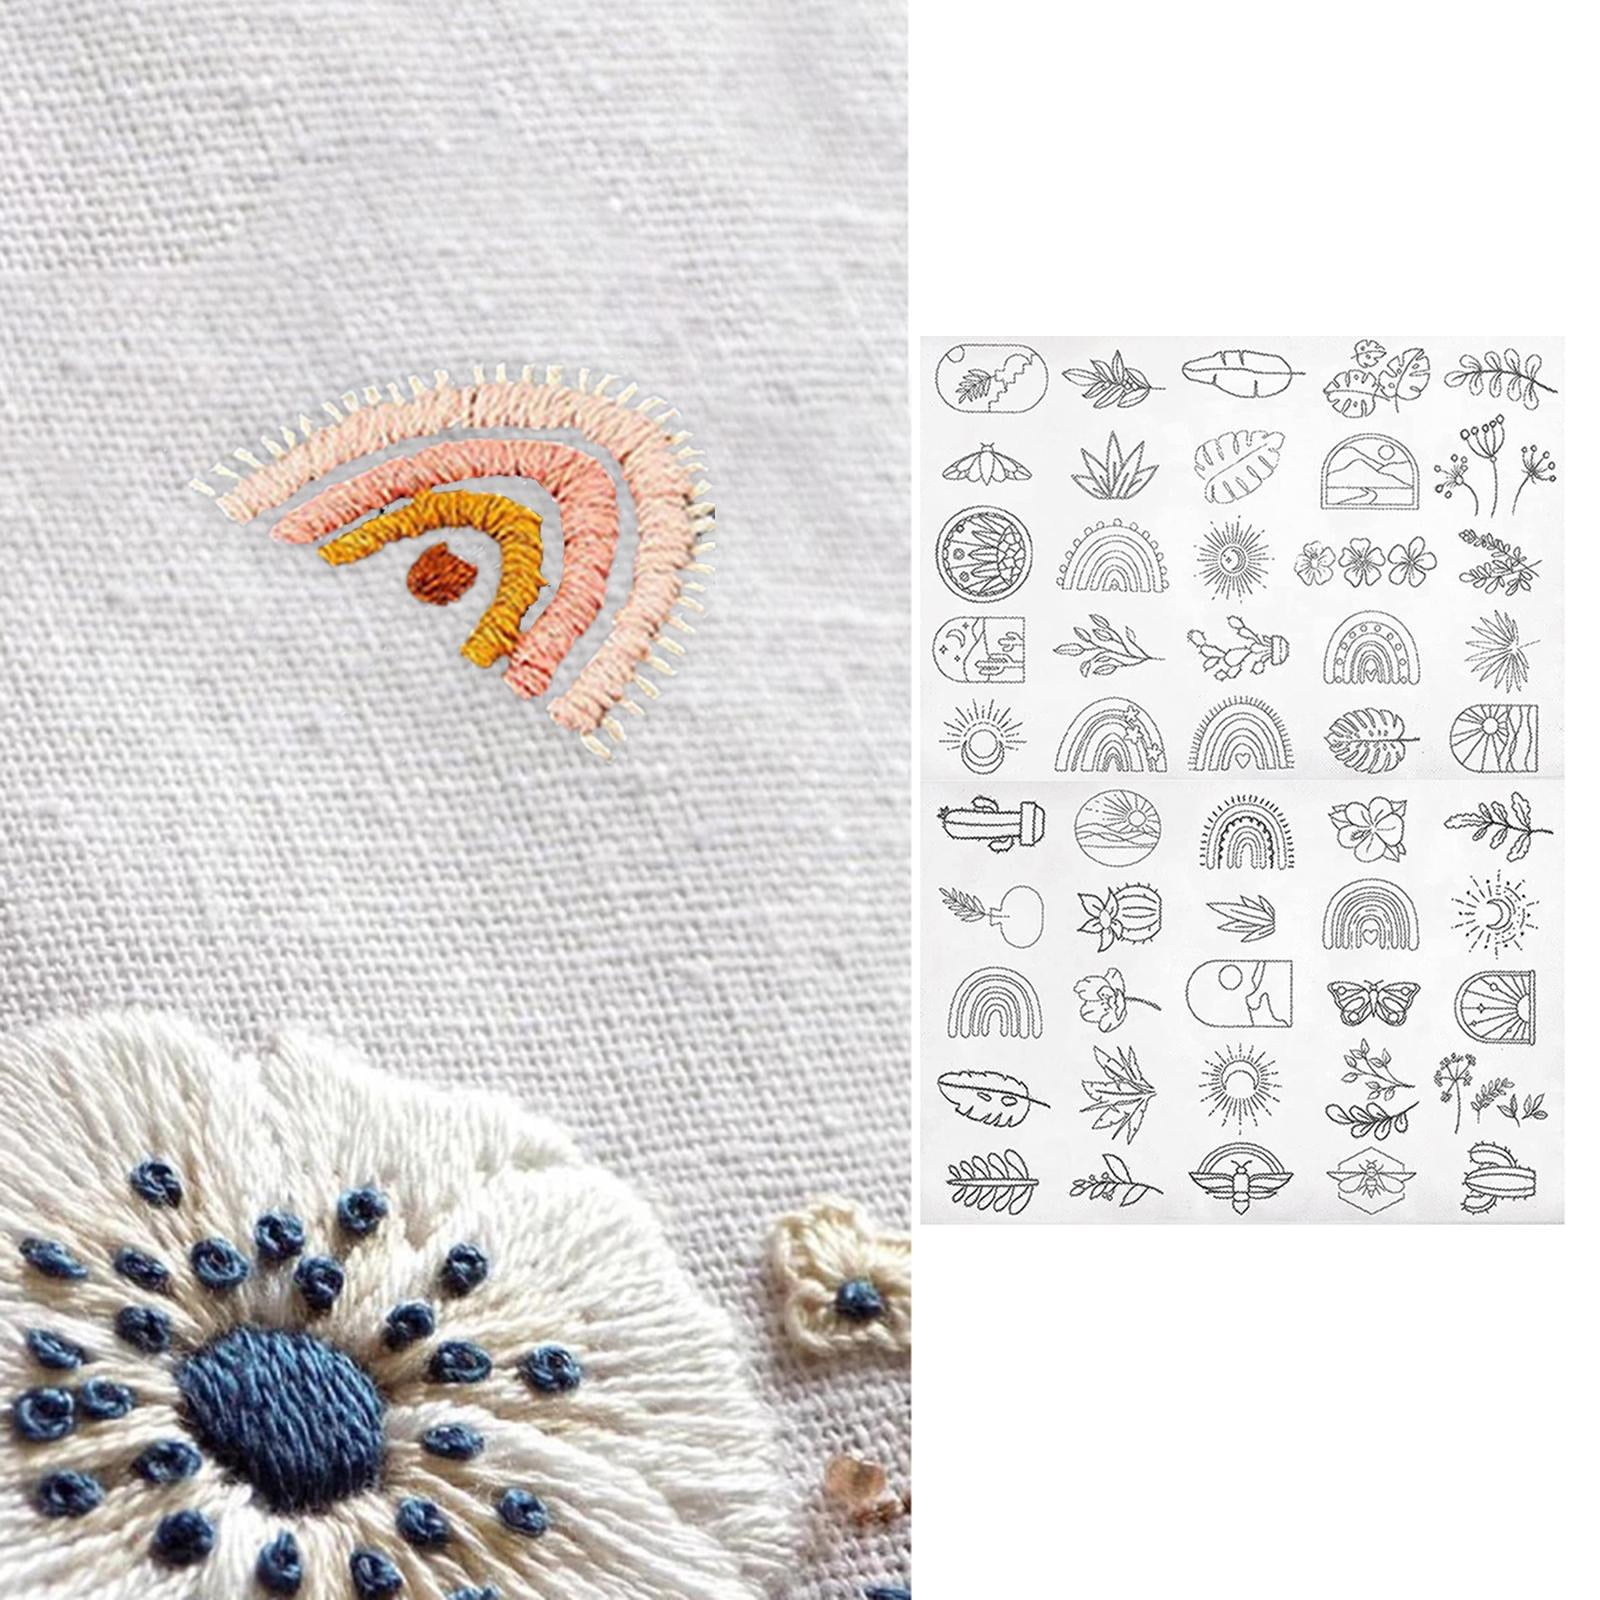 How Embroidery Comes To Life With Water-Soluble Fabric